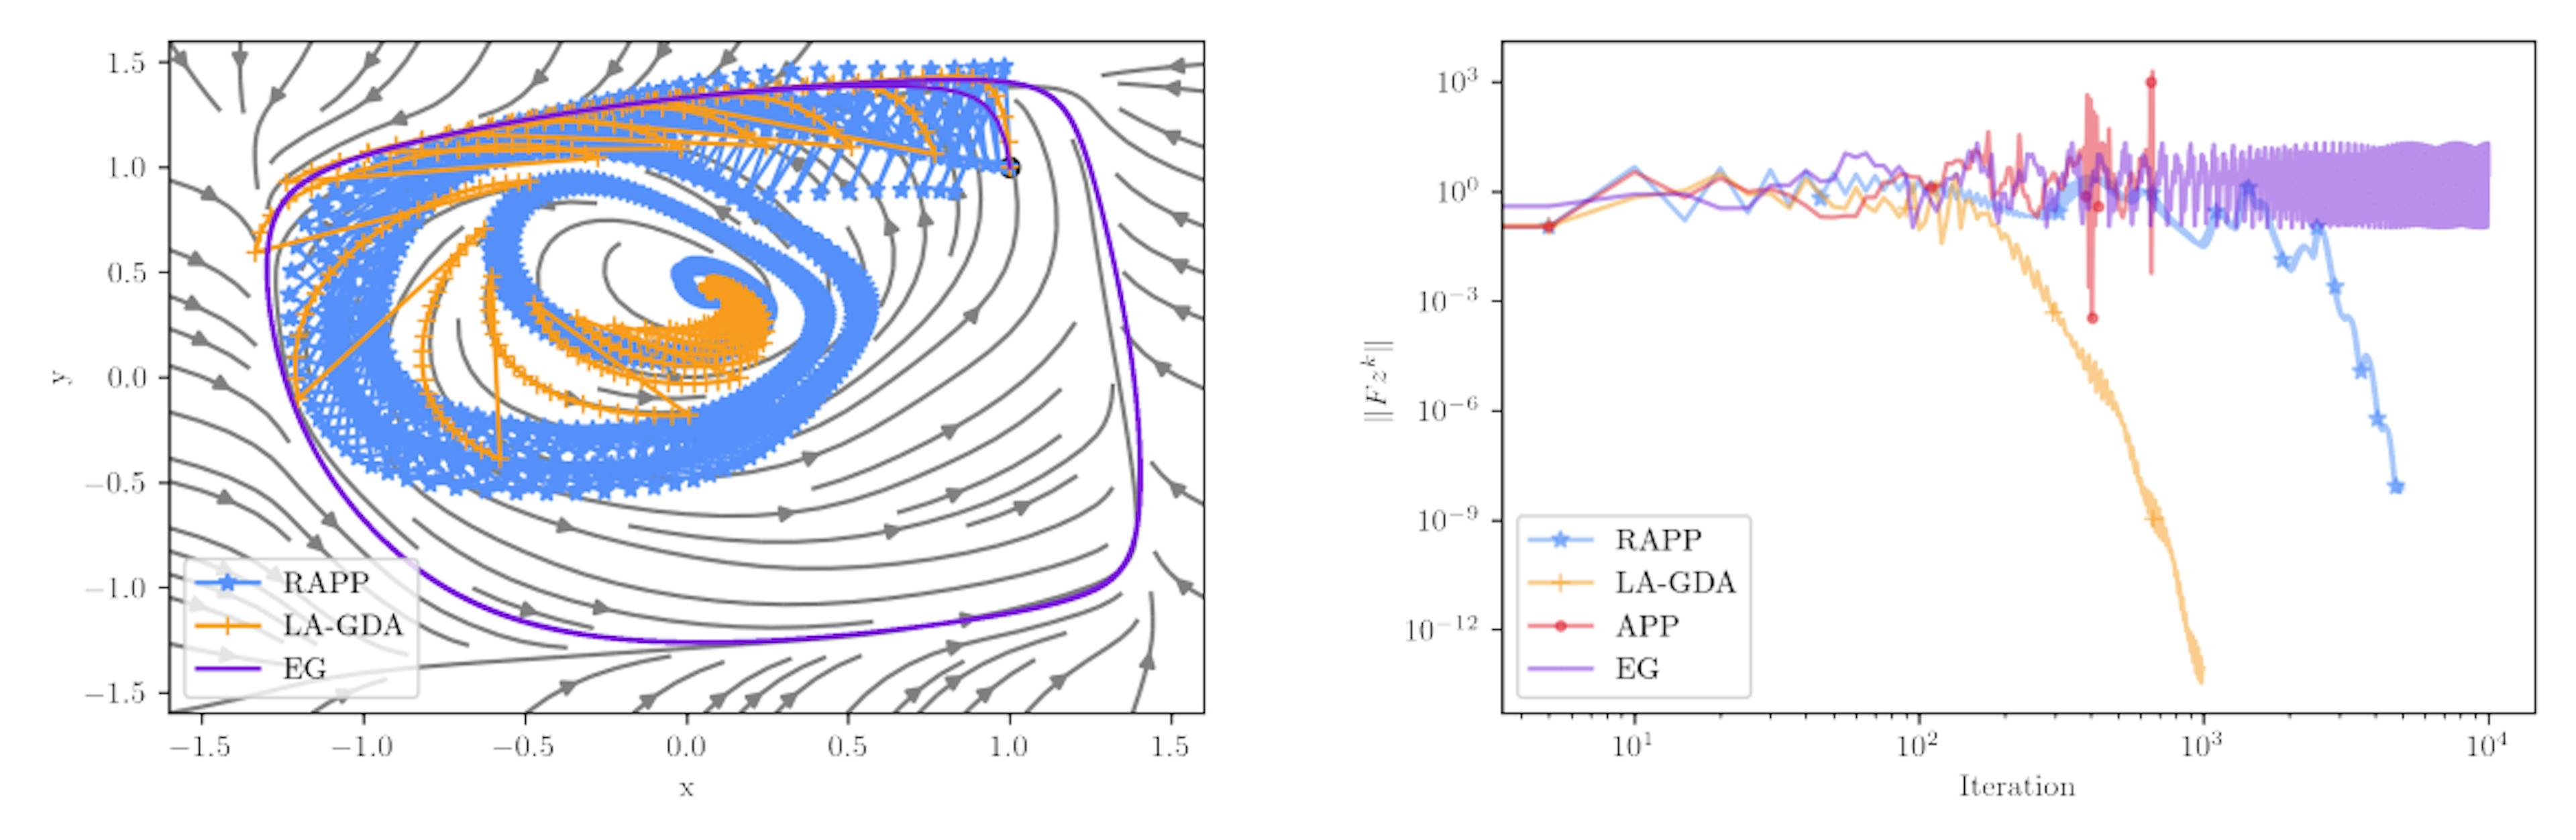 Figure 2: LA-GDA and RAPP can converge for Hsieh et al. (2021, Ex. 5.2). Interestingly, we can set the stepsize γ larger than 1/L while RAPP remains stable. Approximate proximal point (APP) with the same stepsize diverges (the iterates of APP are deferred to Figure 6). In this example, it is apparent from the rates, that there is a benefit in replacing the conservative inner update in RAPP with GDA in LA-GDA as explored in Section 7.